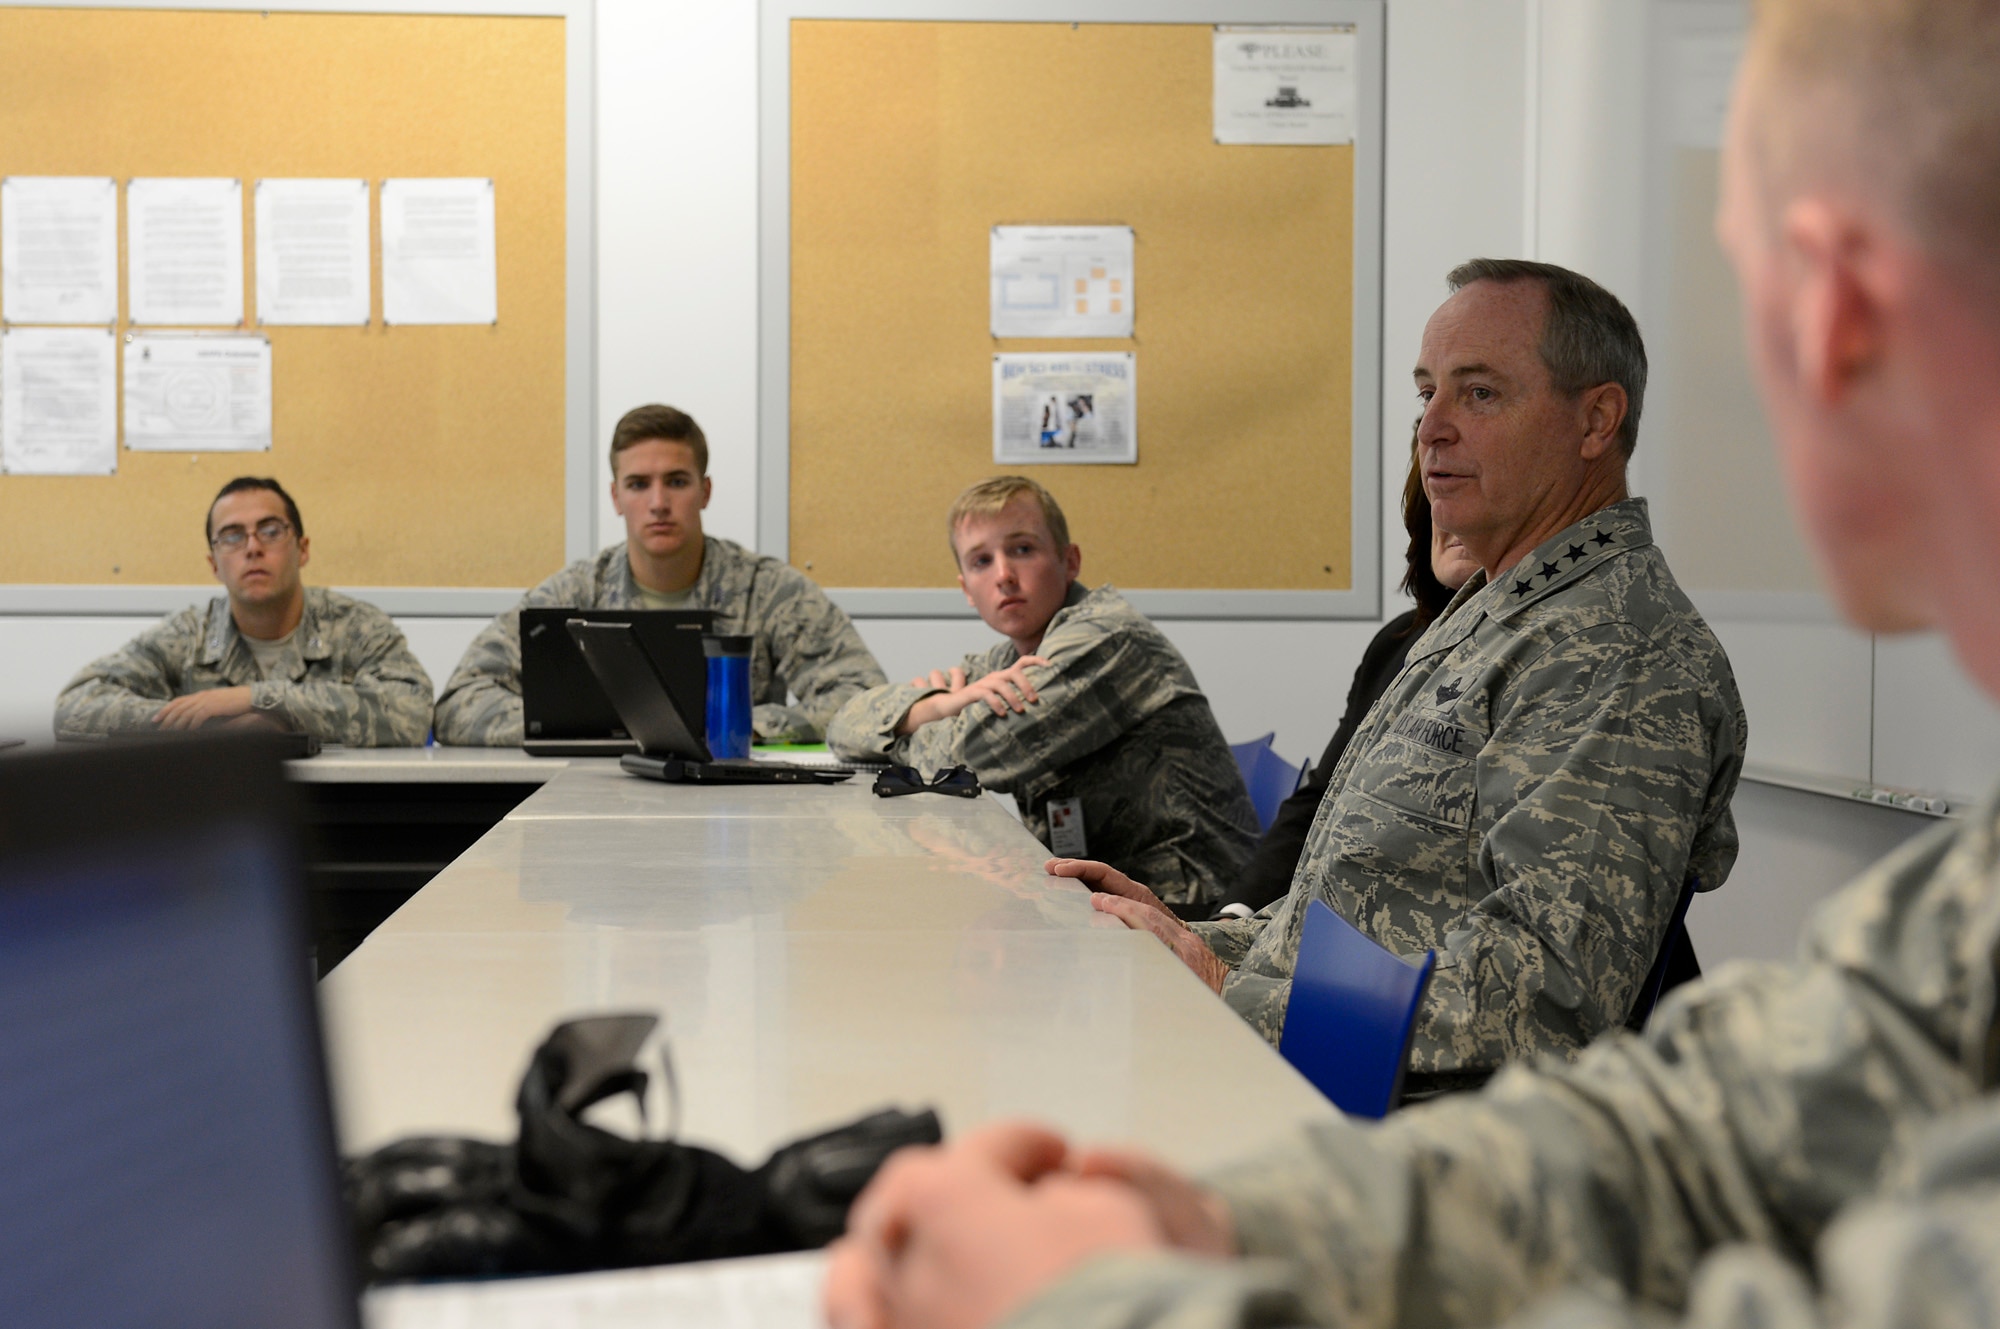 Air Force Chief of Staff Gen. Mark A. Welsh III speaks with cadets during a Behavioral Science 310 class Oct. 28, 2013, U.S. Air Force Academy, Colorado Springs, Colo. Welsh, along with Chief Master Sgt. of the Air Force James A. Cody, visited with cadets Oct. 28 and 29. Welsh also hosted a cadet call, met with cadets over lunch and teamed with Cody to answer questions during “Stars and Chevrons,” a show on the cadet-run radio station, KAFA 97.7 FM.